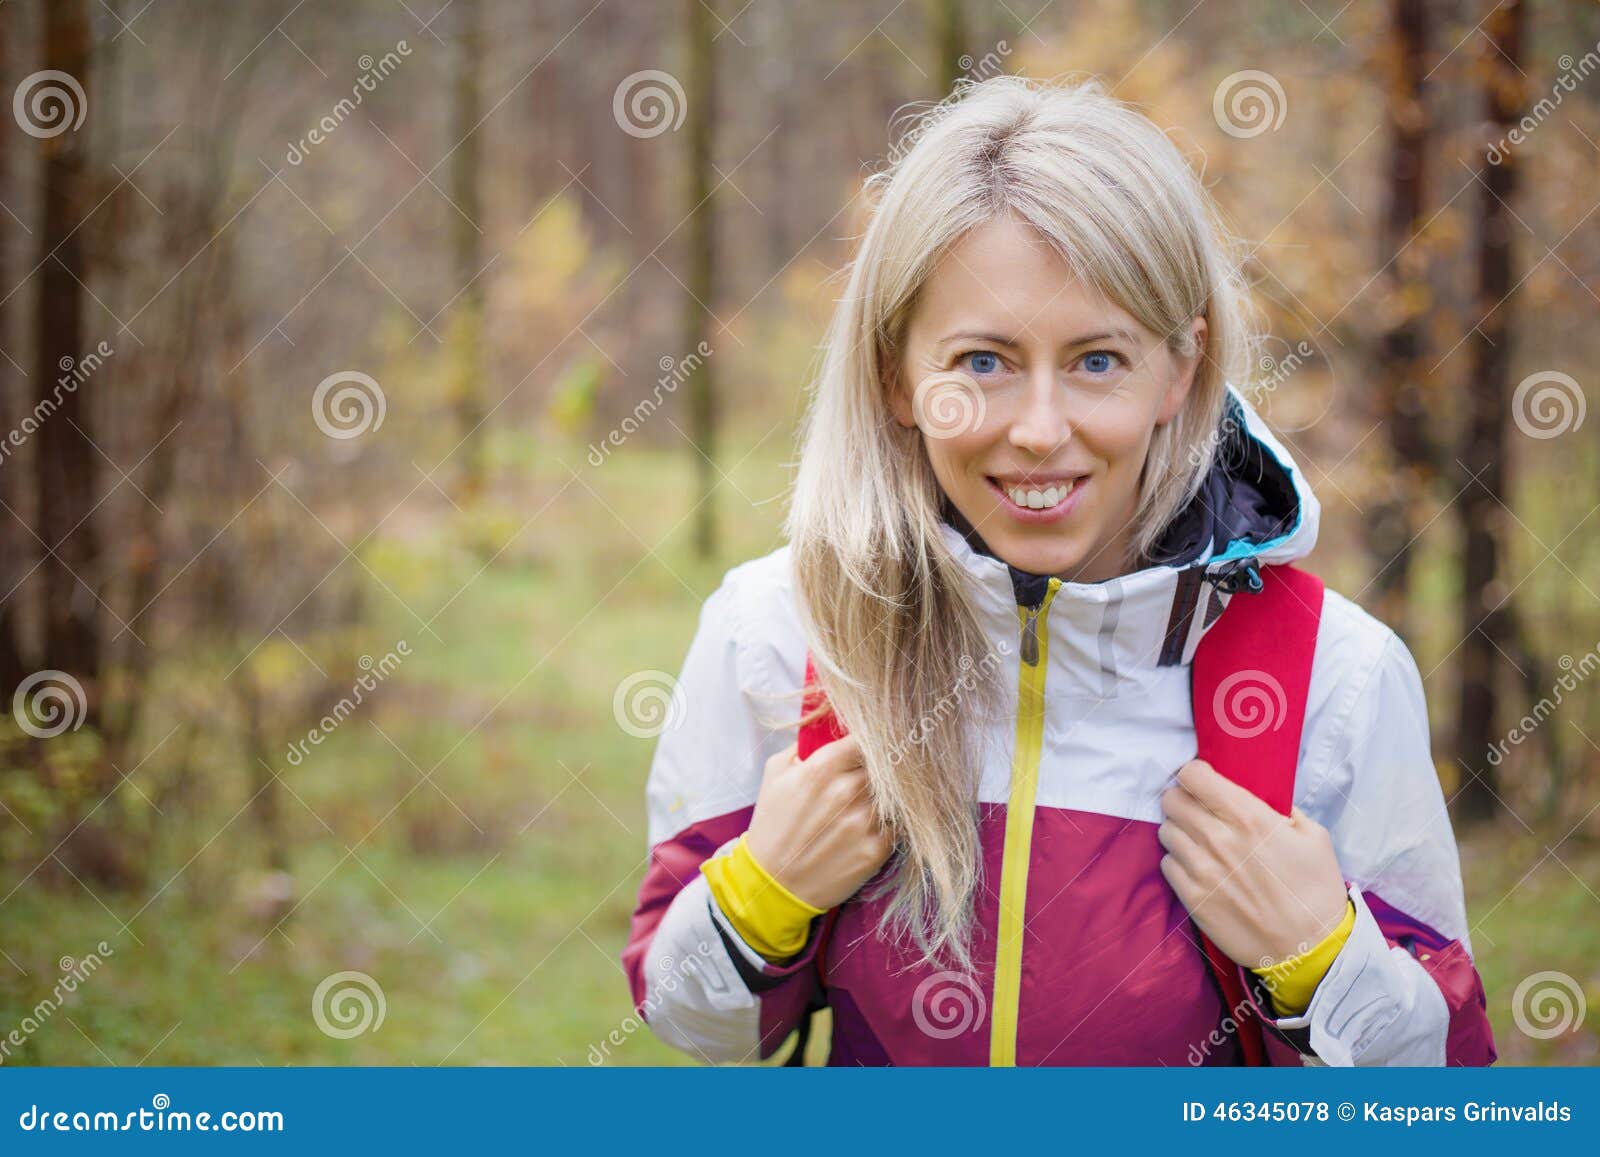 young woman with backpack hiking in woods